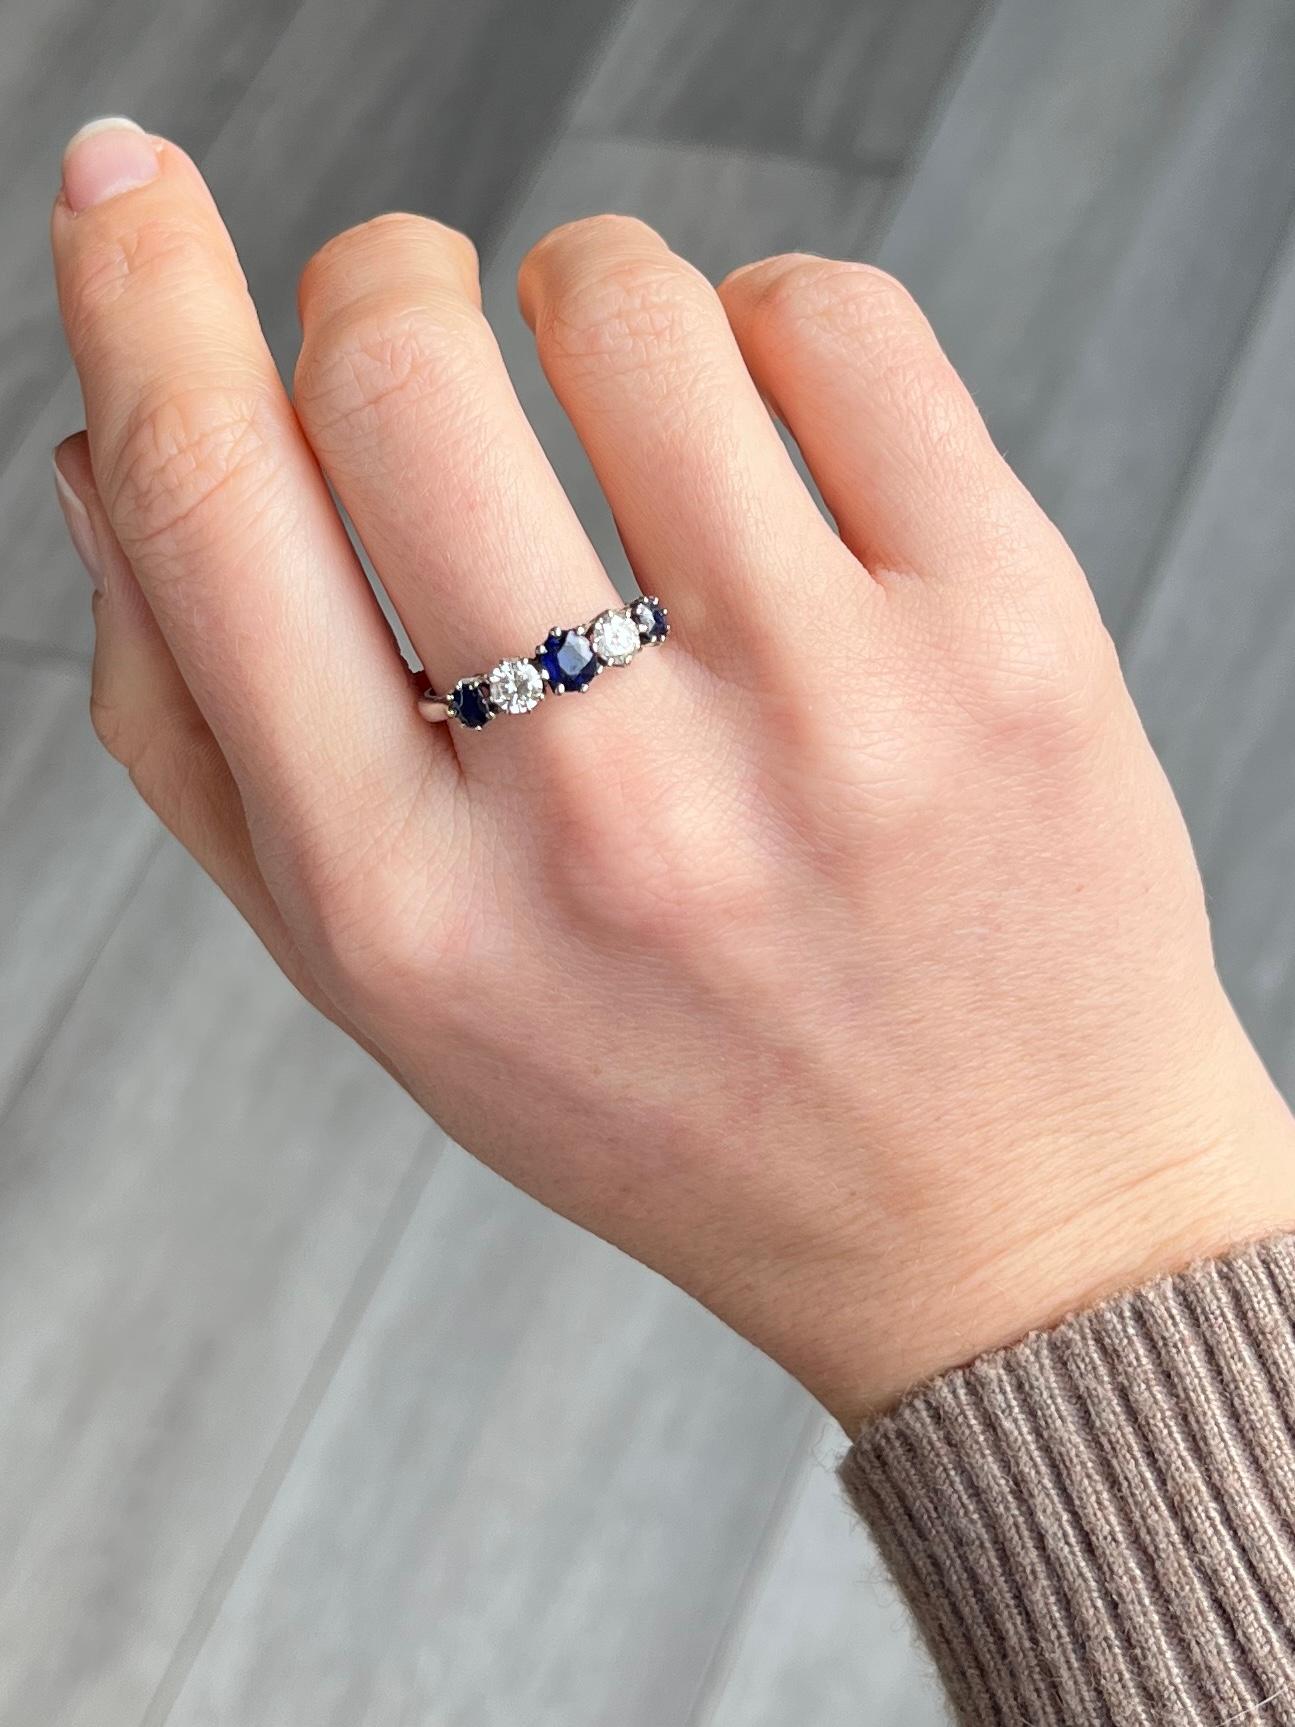 This gorgeous ring holds three deep blue sapphires and two diamonds which measure 30pts each. The central sapphire measures 40pt and the smaller ones on the outside of the ring measure 20pts each. The ring is modelled in 18ct white gold. 

Ring